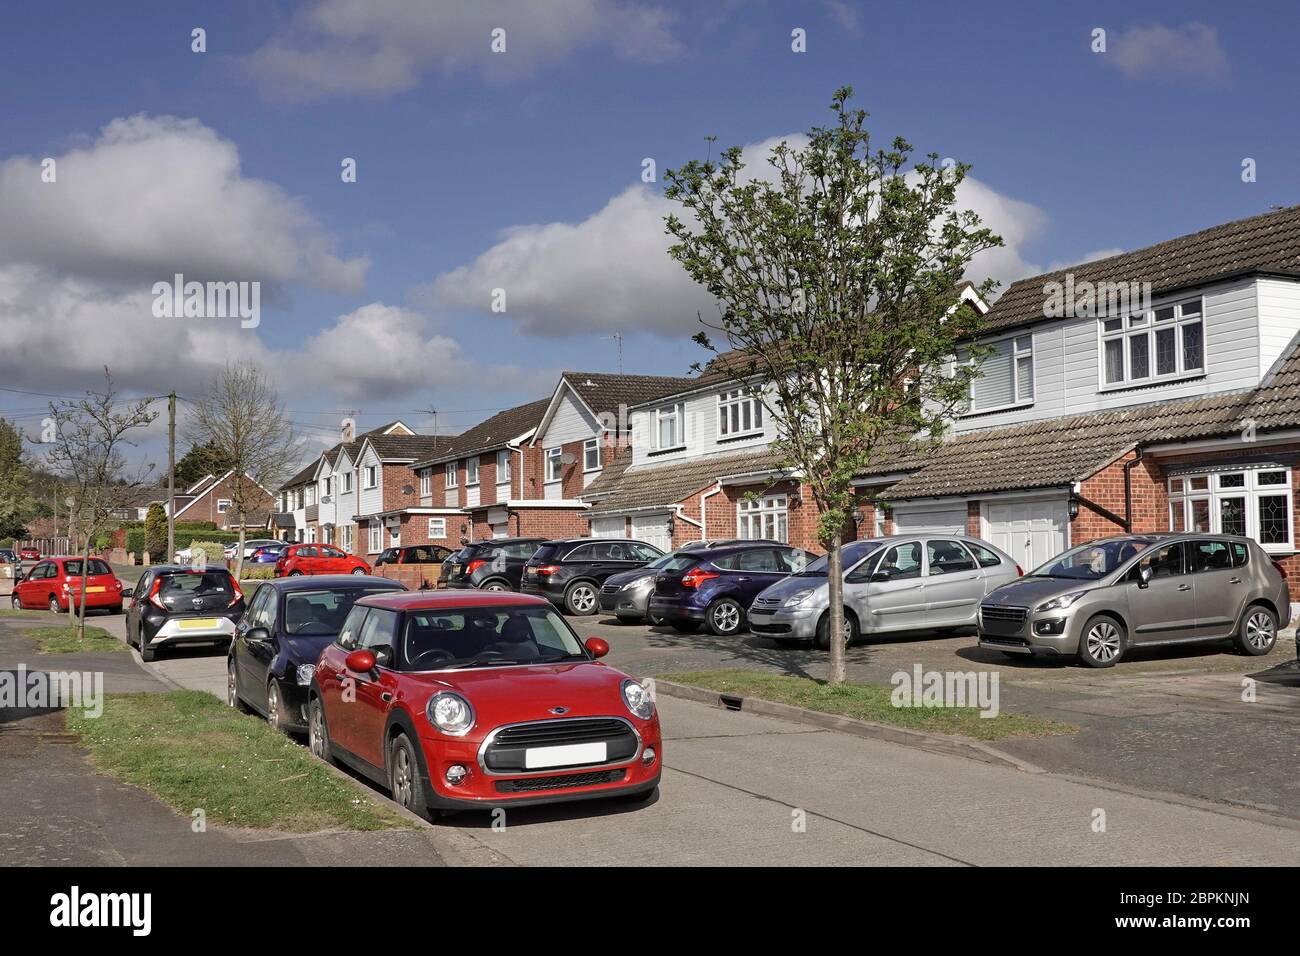 Residential suburb street car parking scene in road & houses with cars on original lawn front garden now paved vehicle park space  Essex England UK Stock Photo